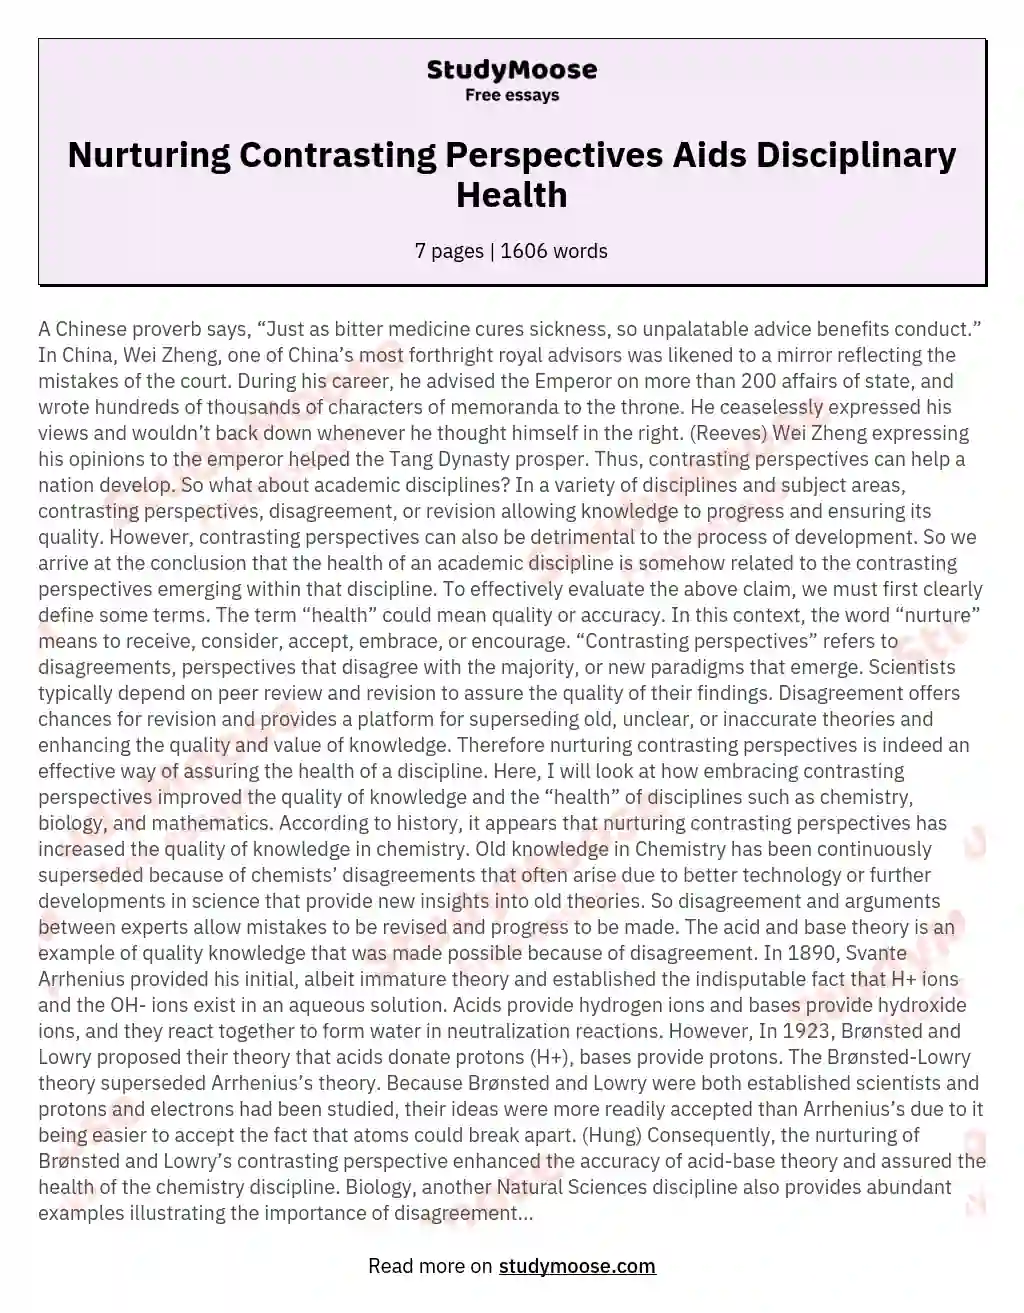 Nurturing Contrasting Perspectives Aids Disciplinary Health